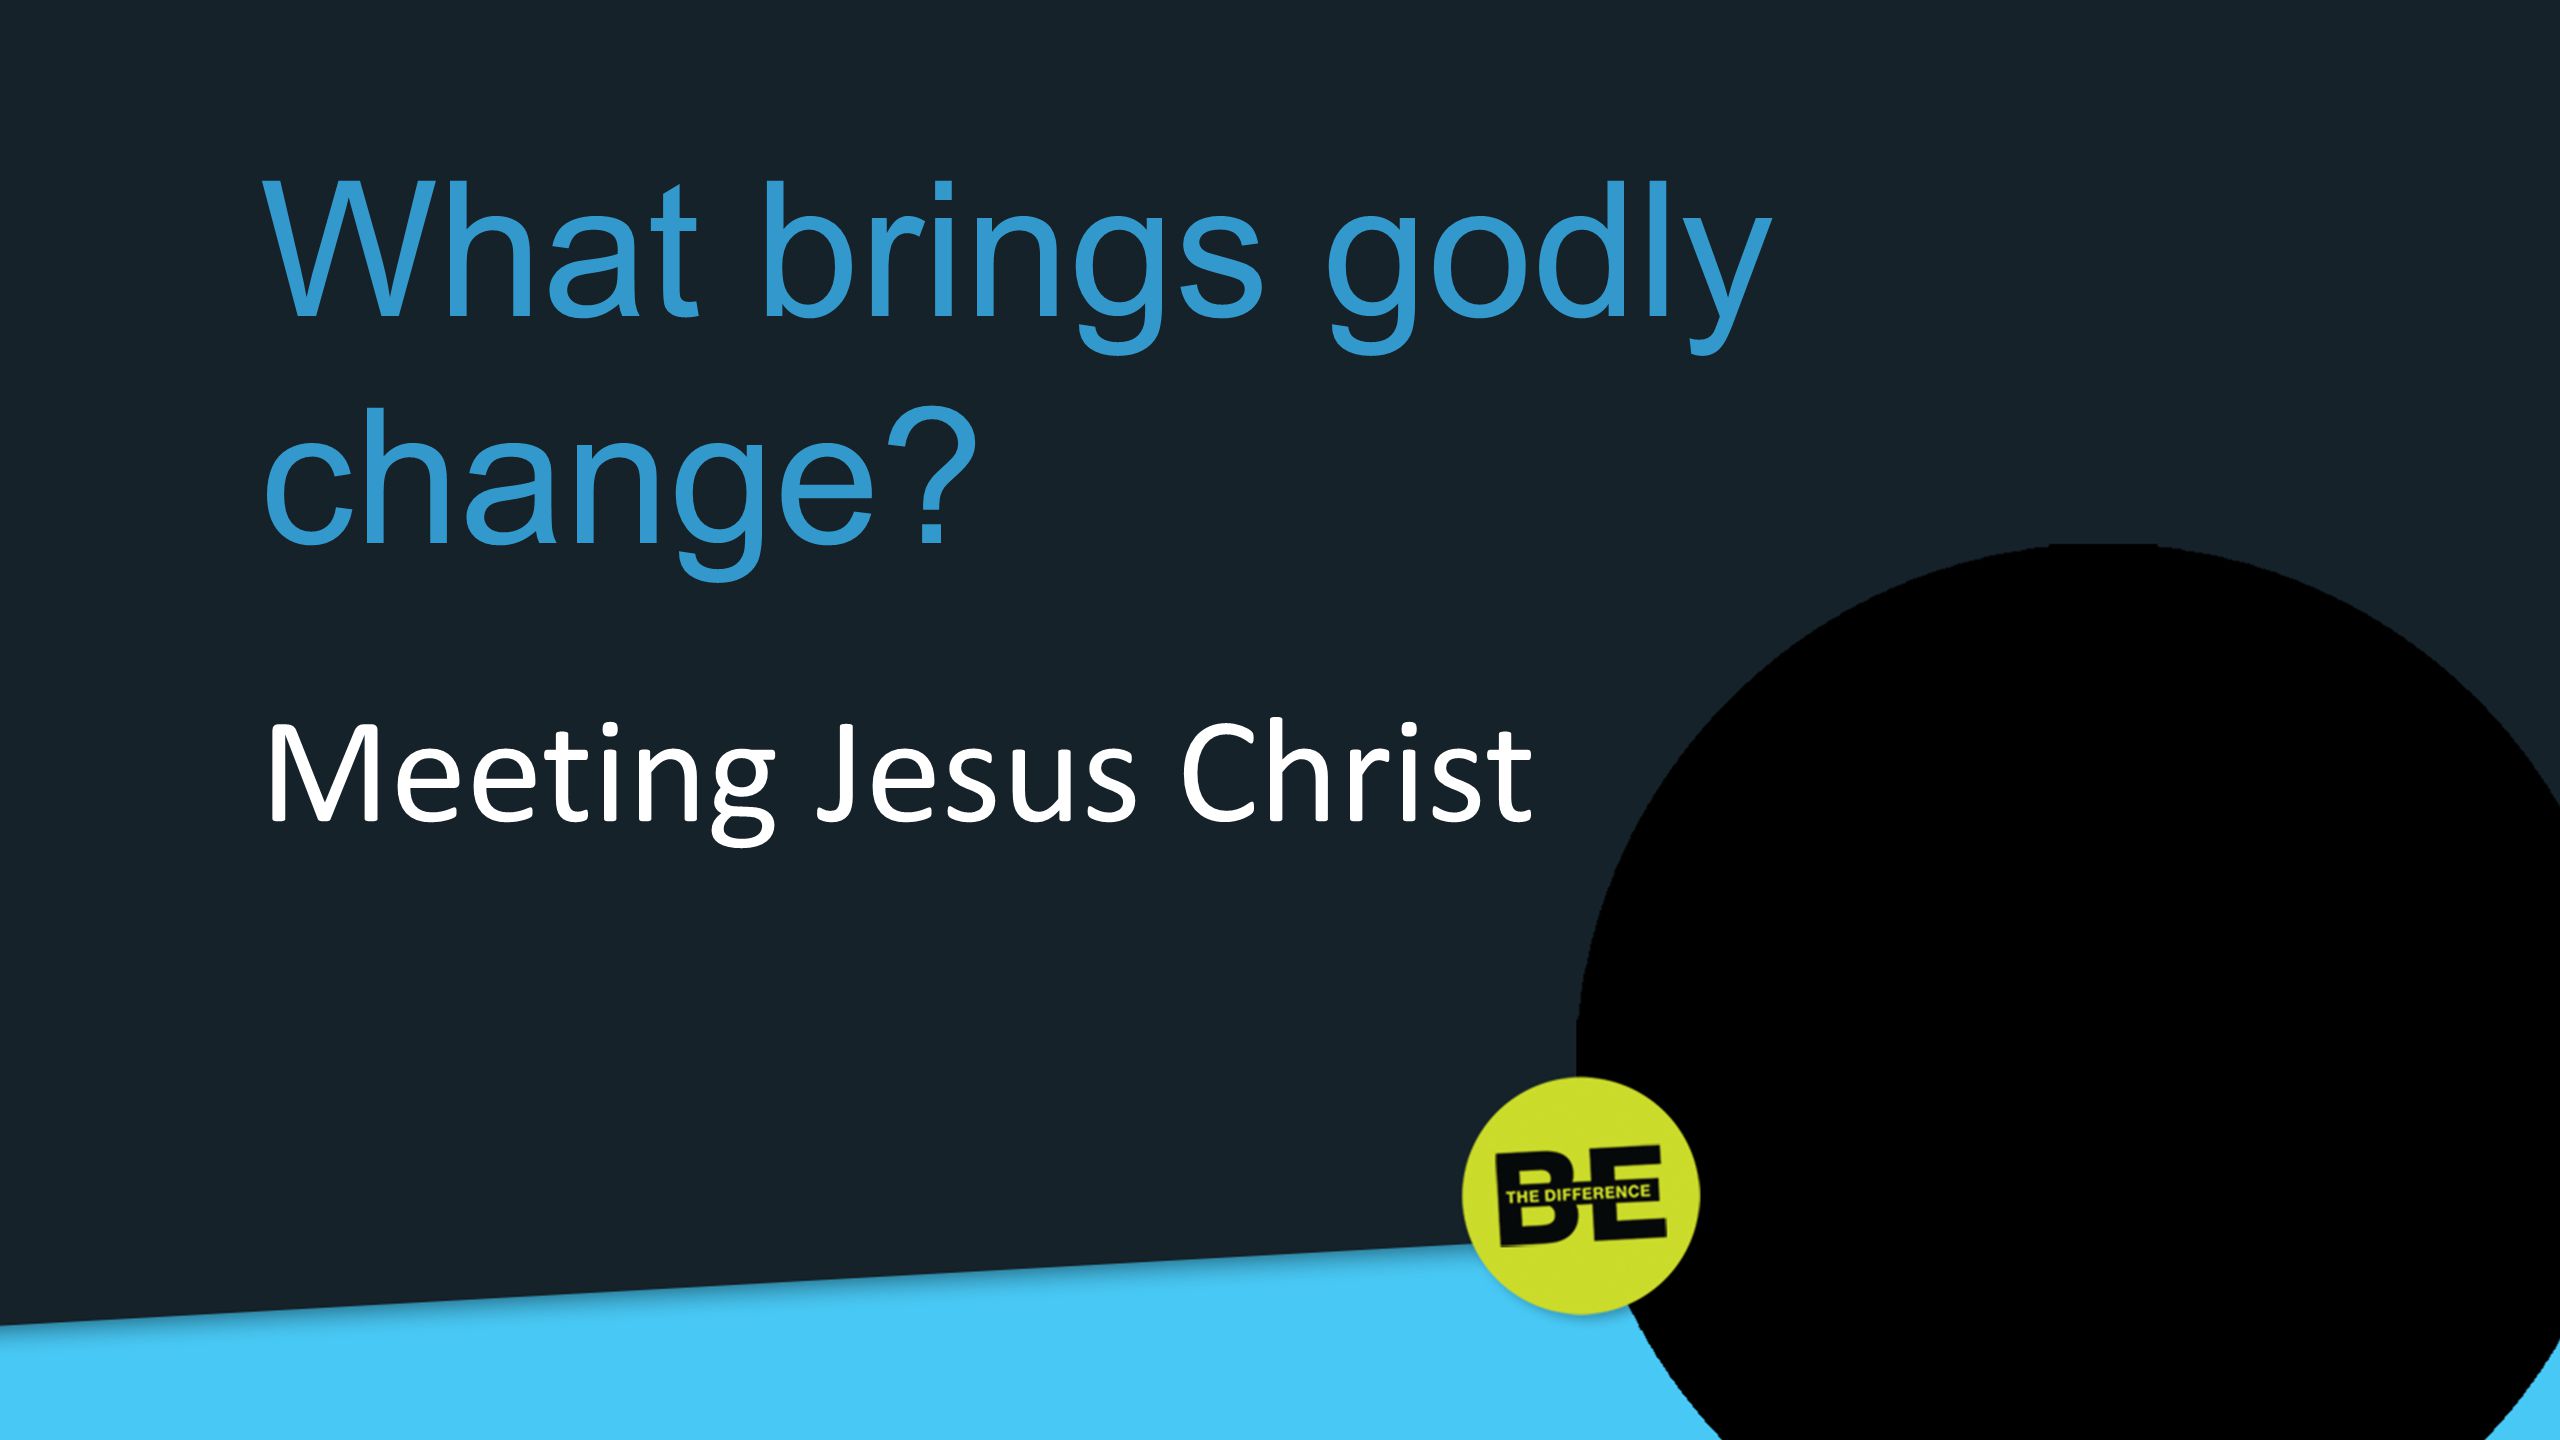 What brings godly change